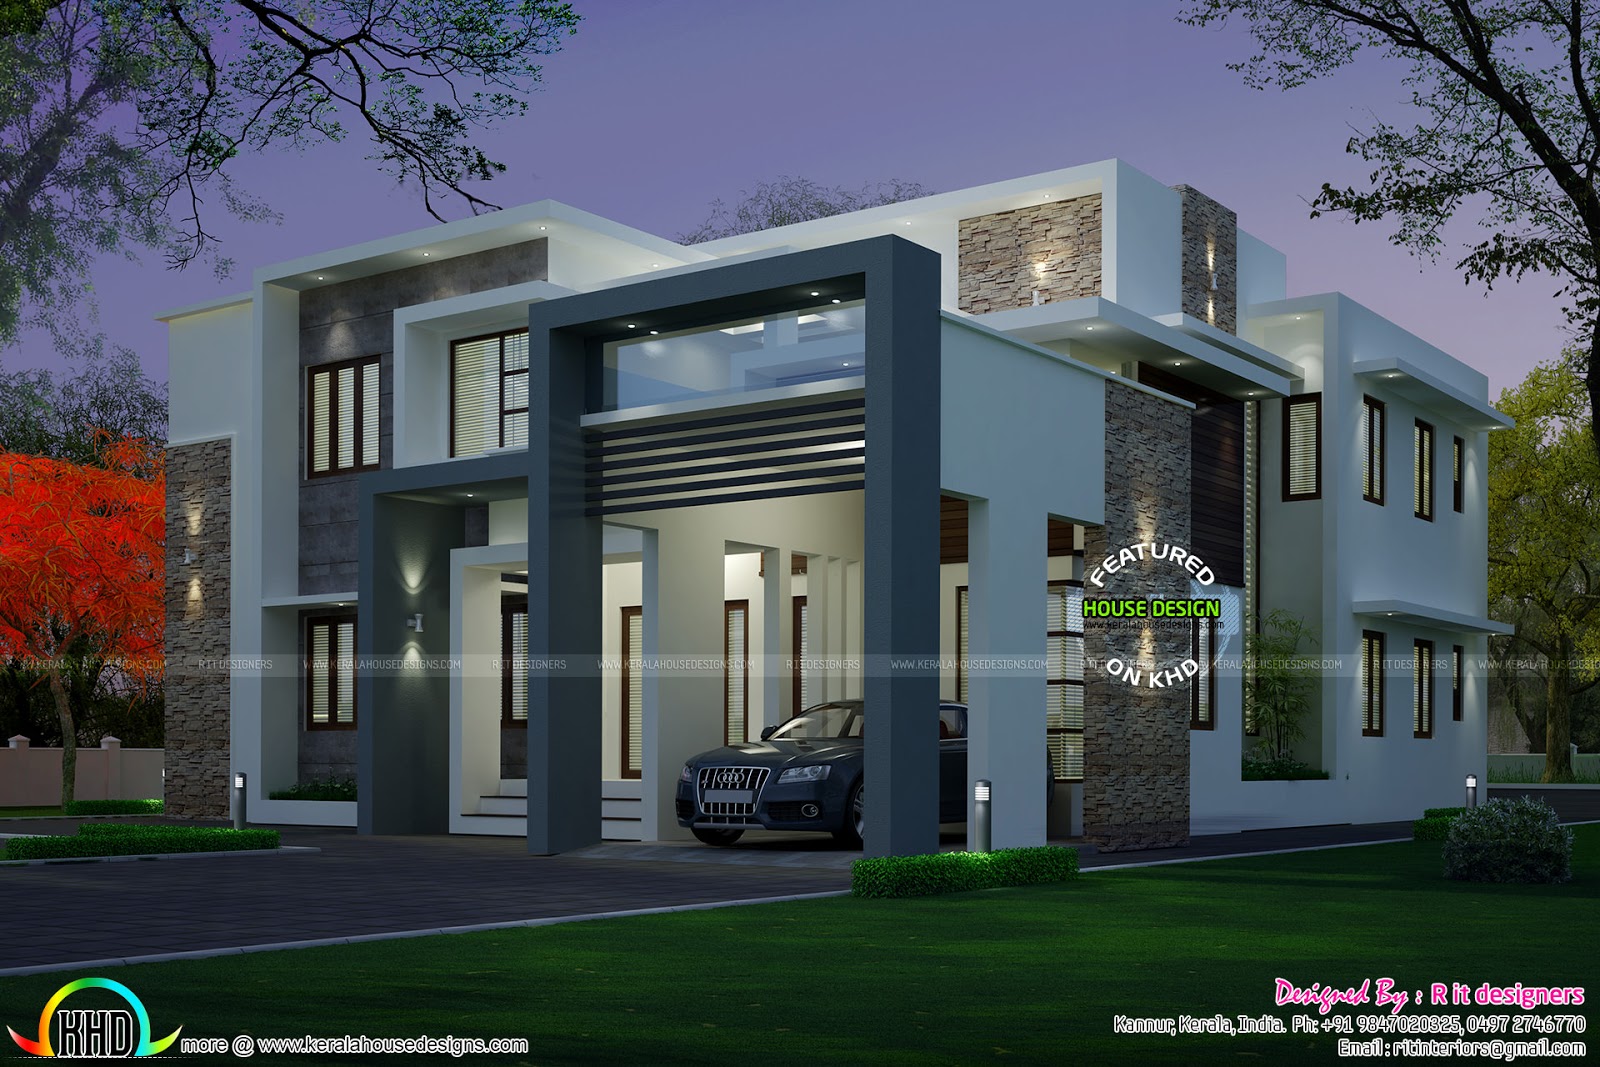 4 bedroom modern  house  night view and day view Kerala  